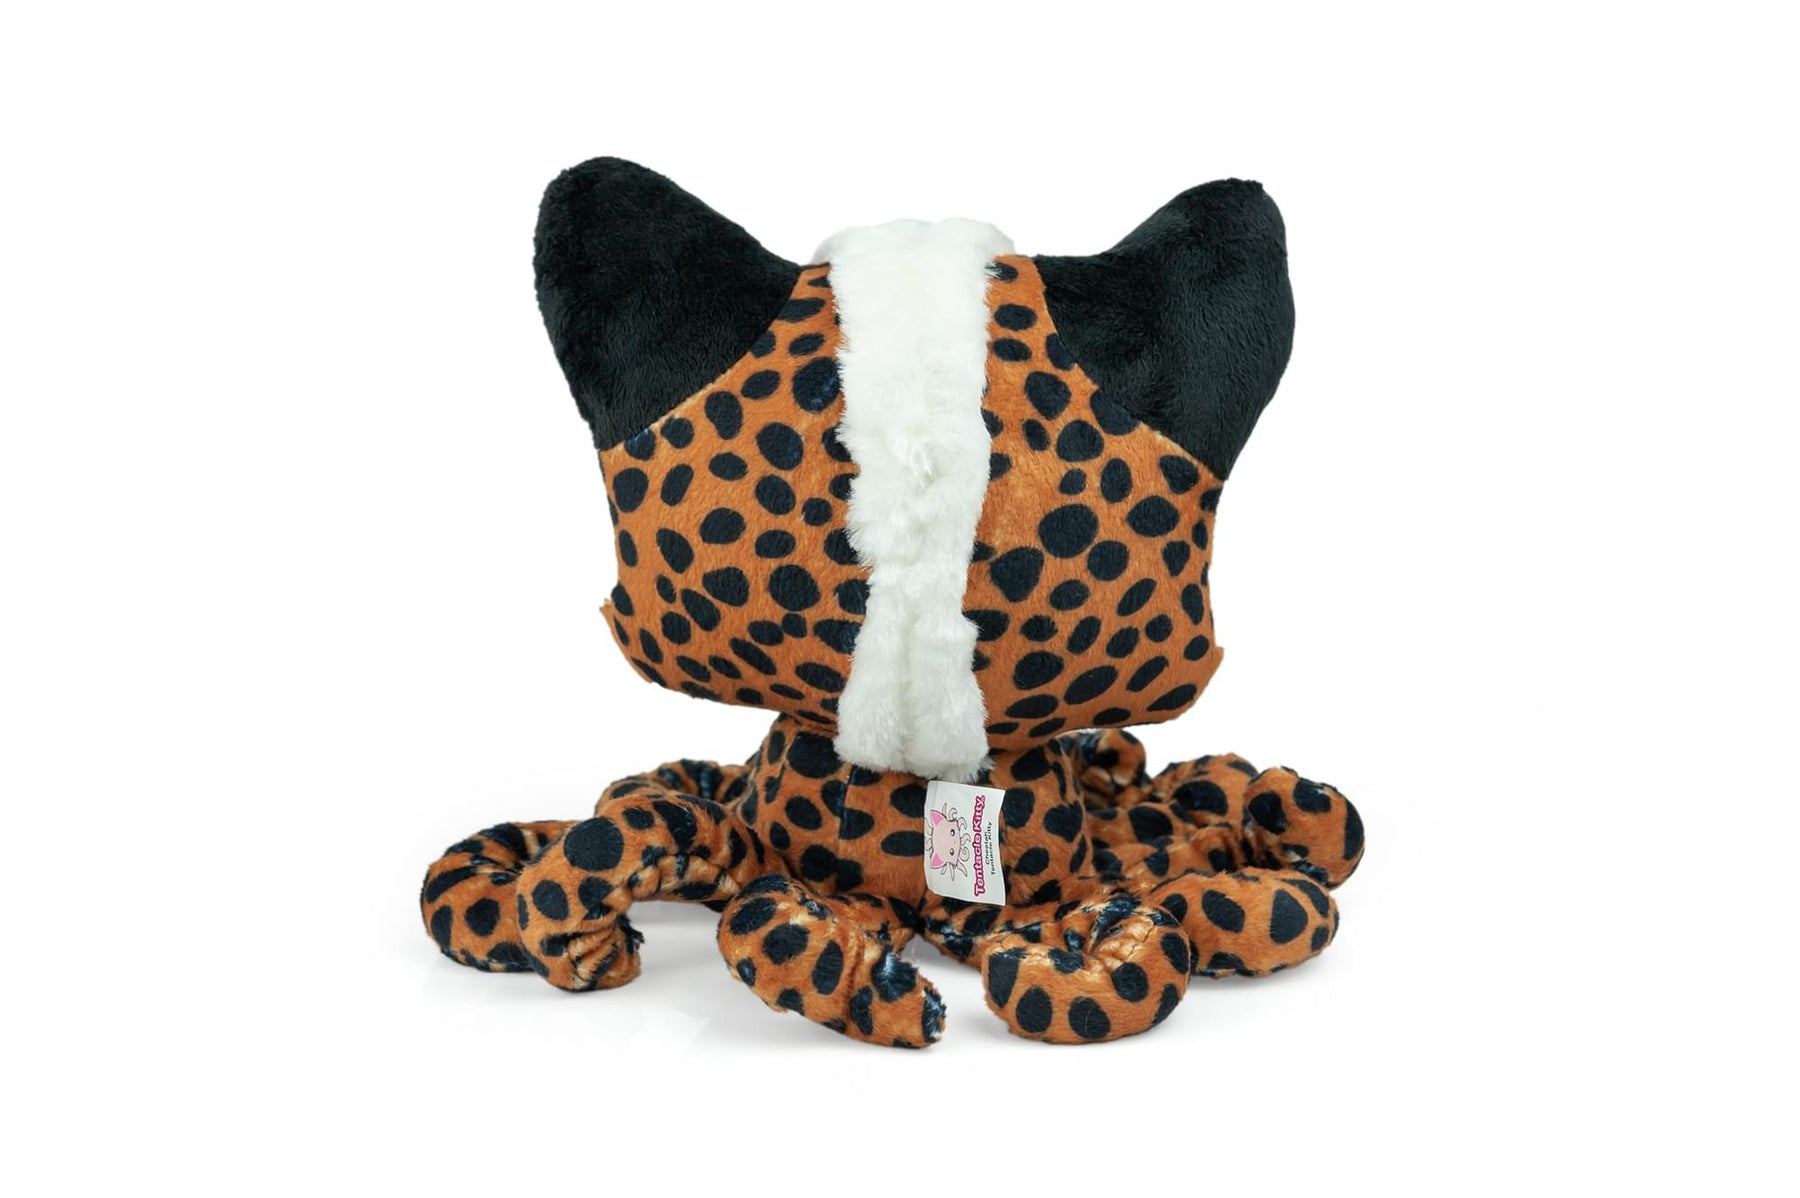 Tentacle Kitty Series Cheetah Kitty Plush Collectible | Measures 8 Inches Tall